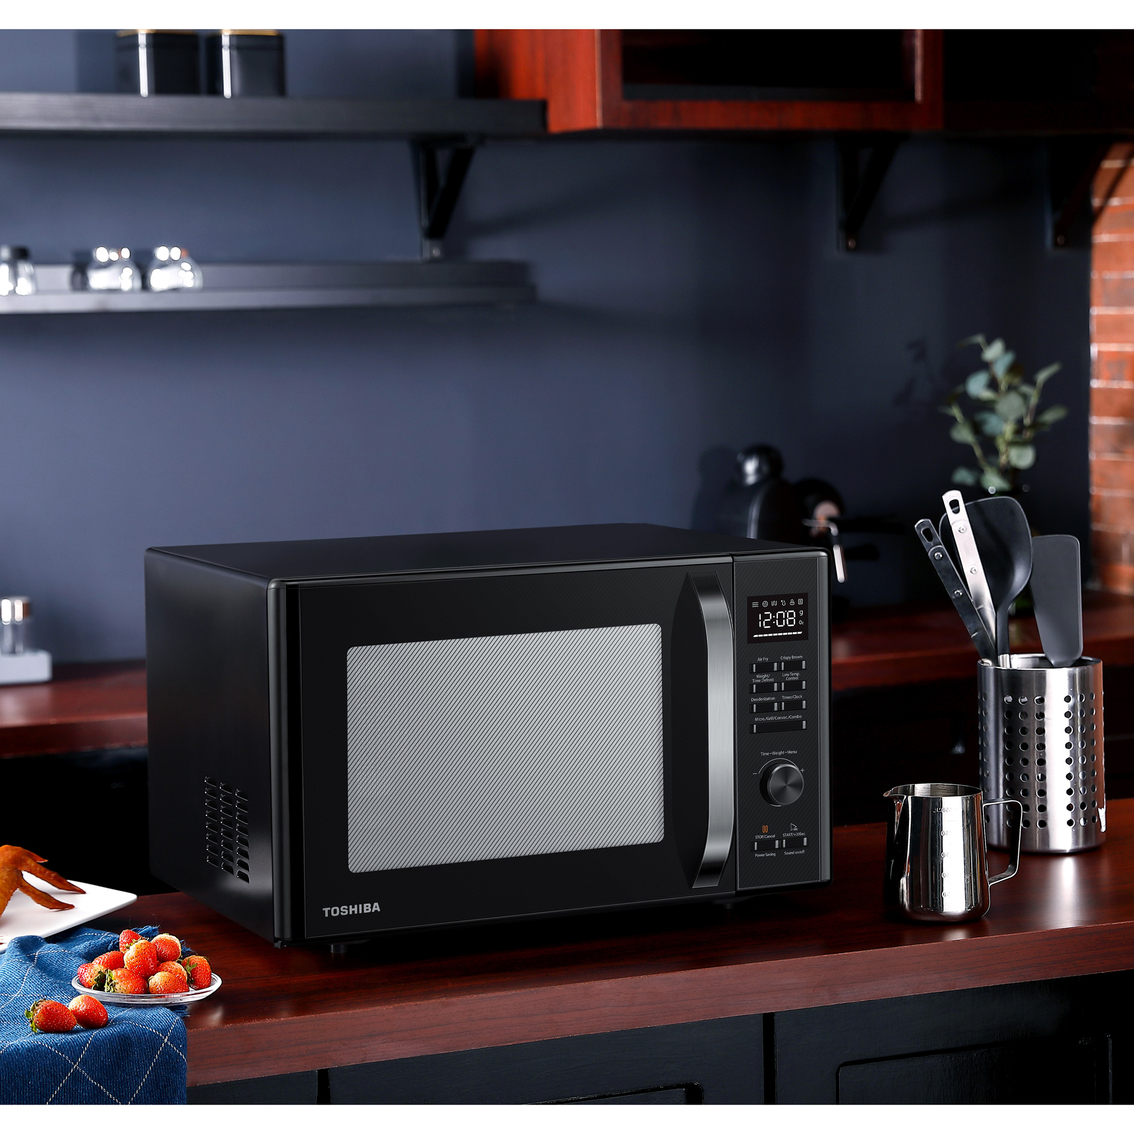 Toshiba 1 cu. ft. 6-in-1 Multifunction Versa Microwave Oven - Image 6 of 7